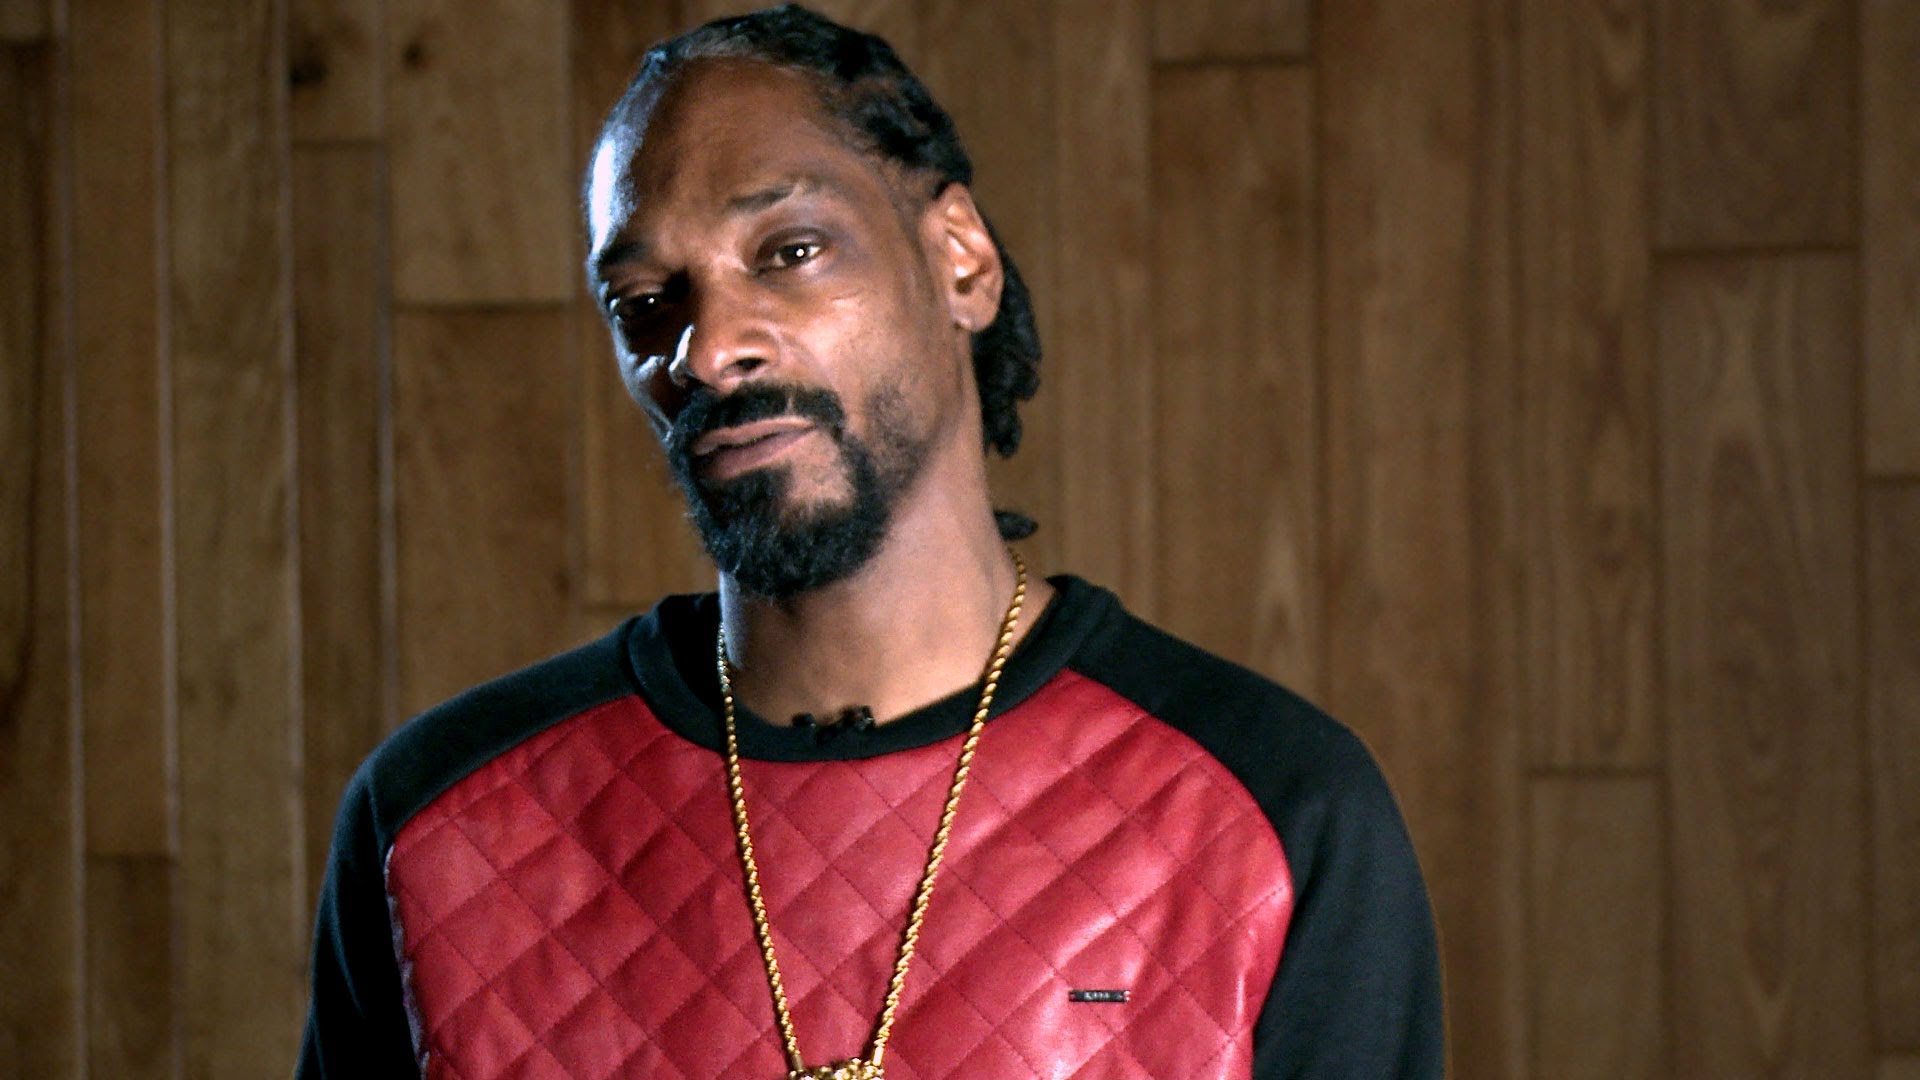 Update On Snoop Dogg Going Into The WWE Hall Of Fame